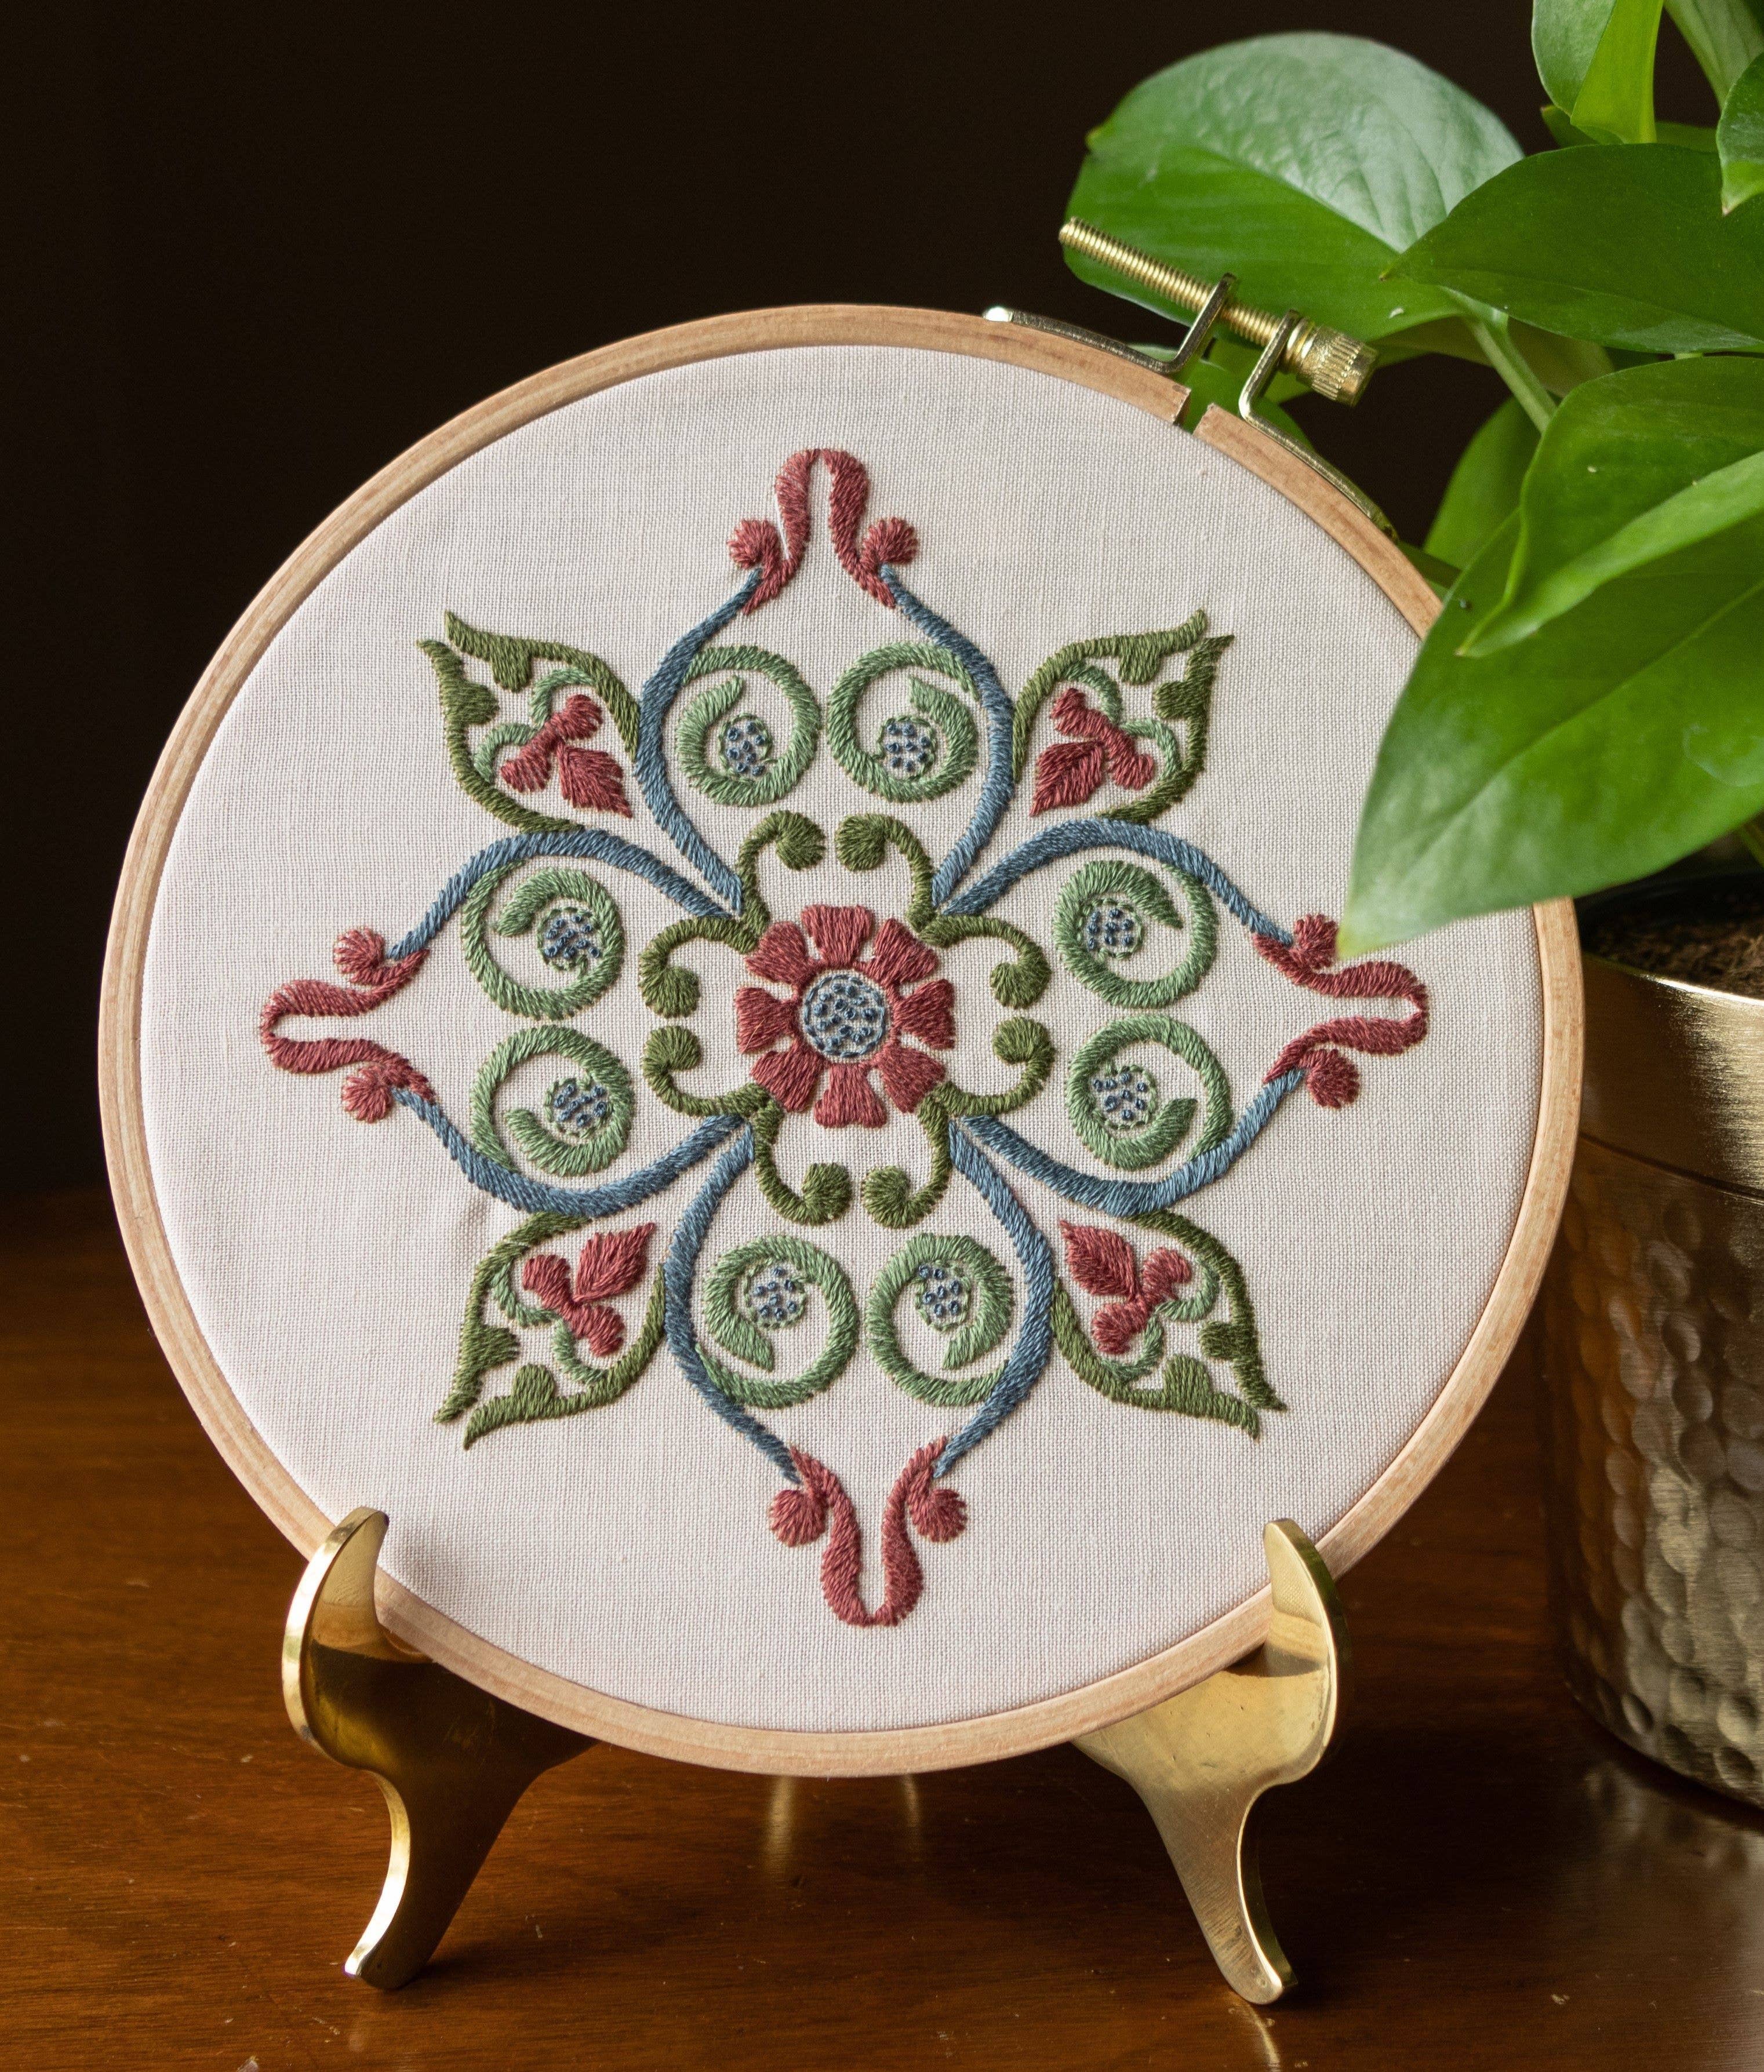 Avlea Folk Embroidery  Cross Stitch kits inspired by traditional